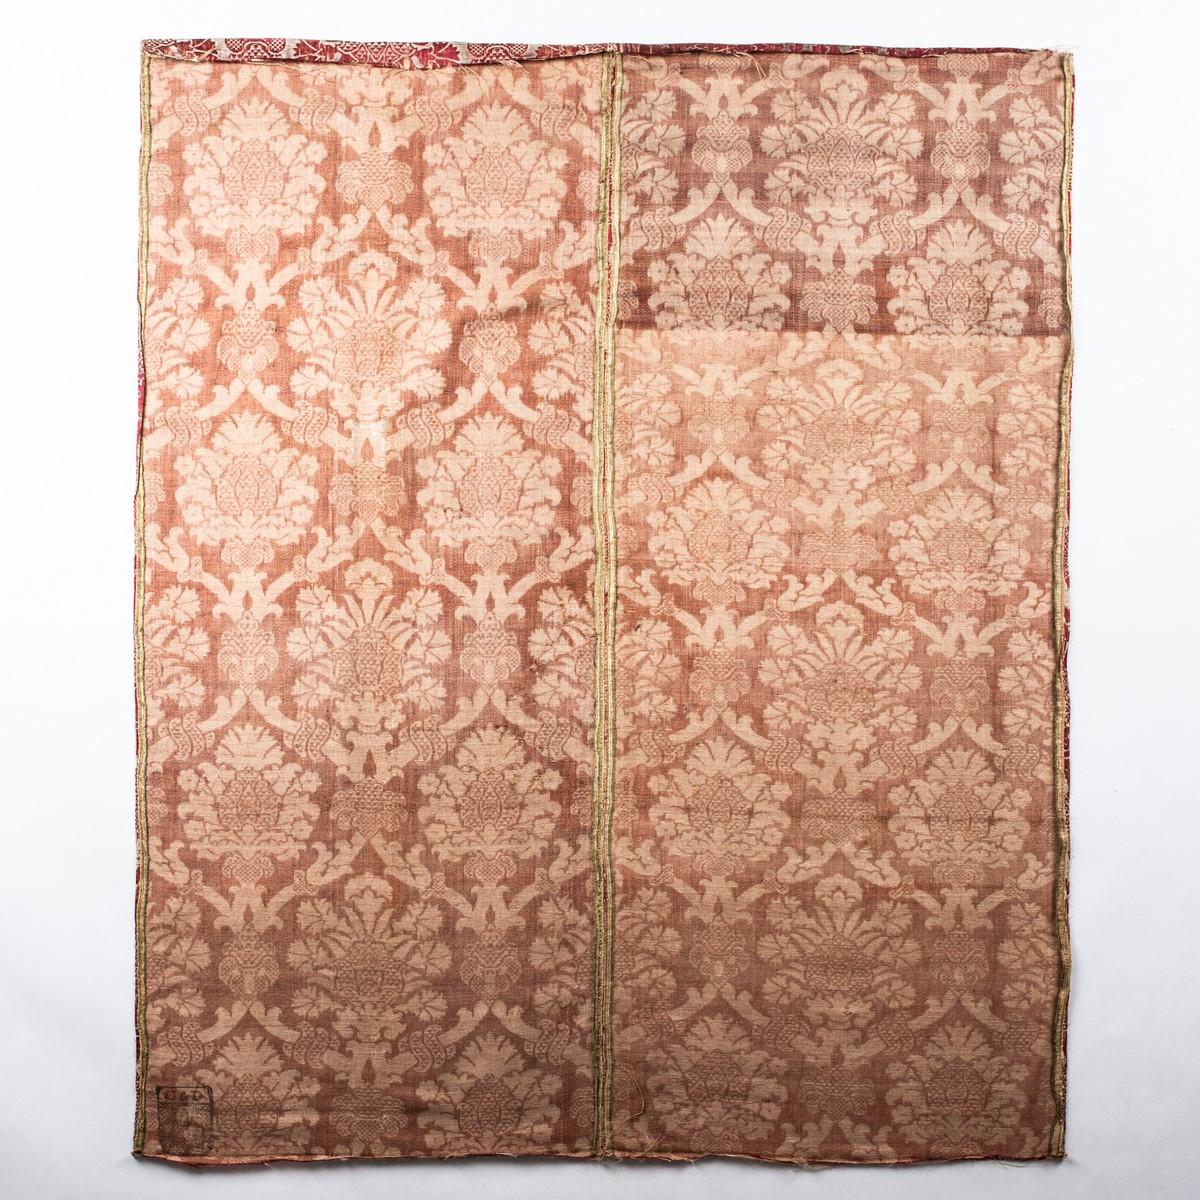 A Rare Early Brocatelle Linen & Silk hanging - Italy or Spain Late 16th century For Sale 6